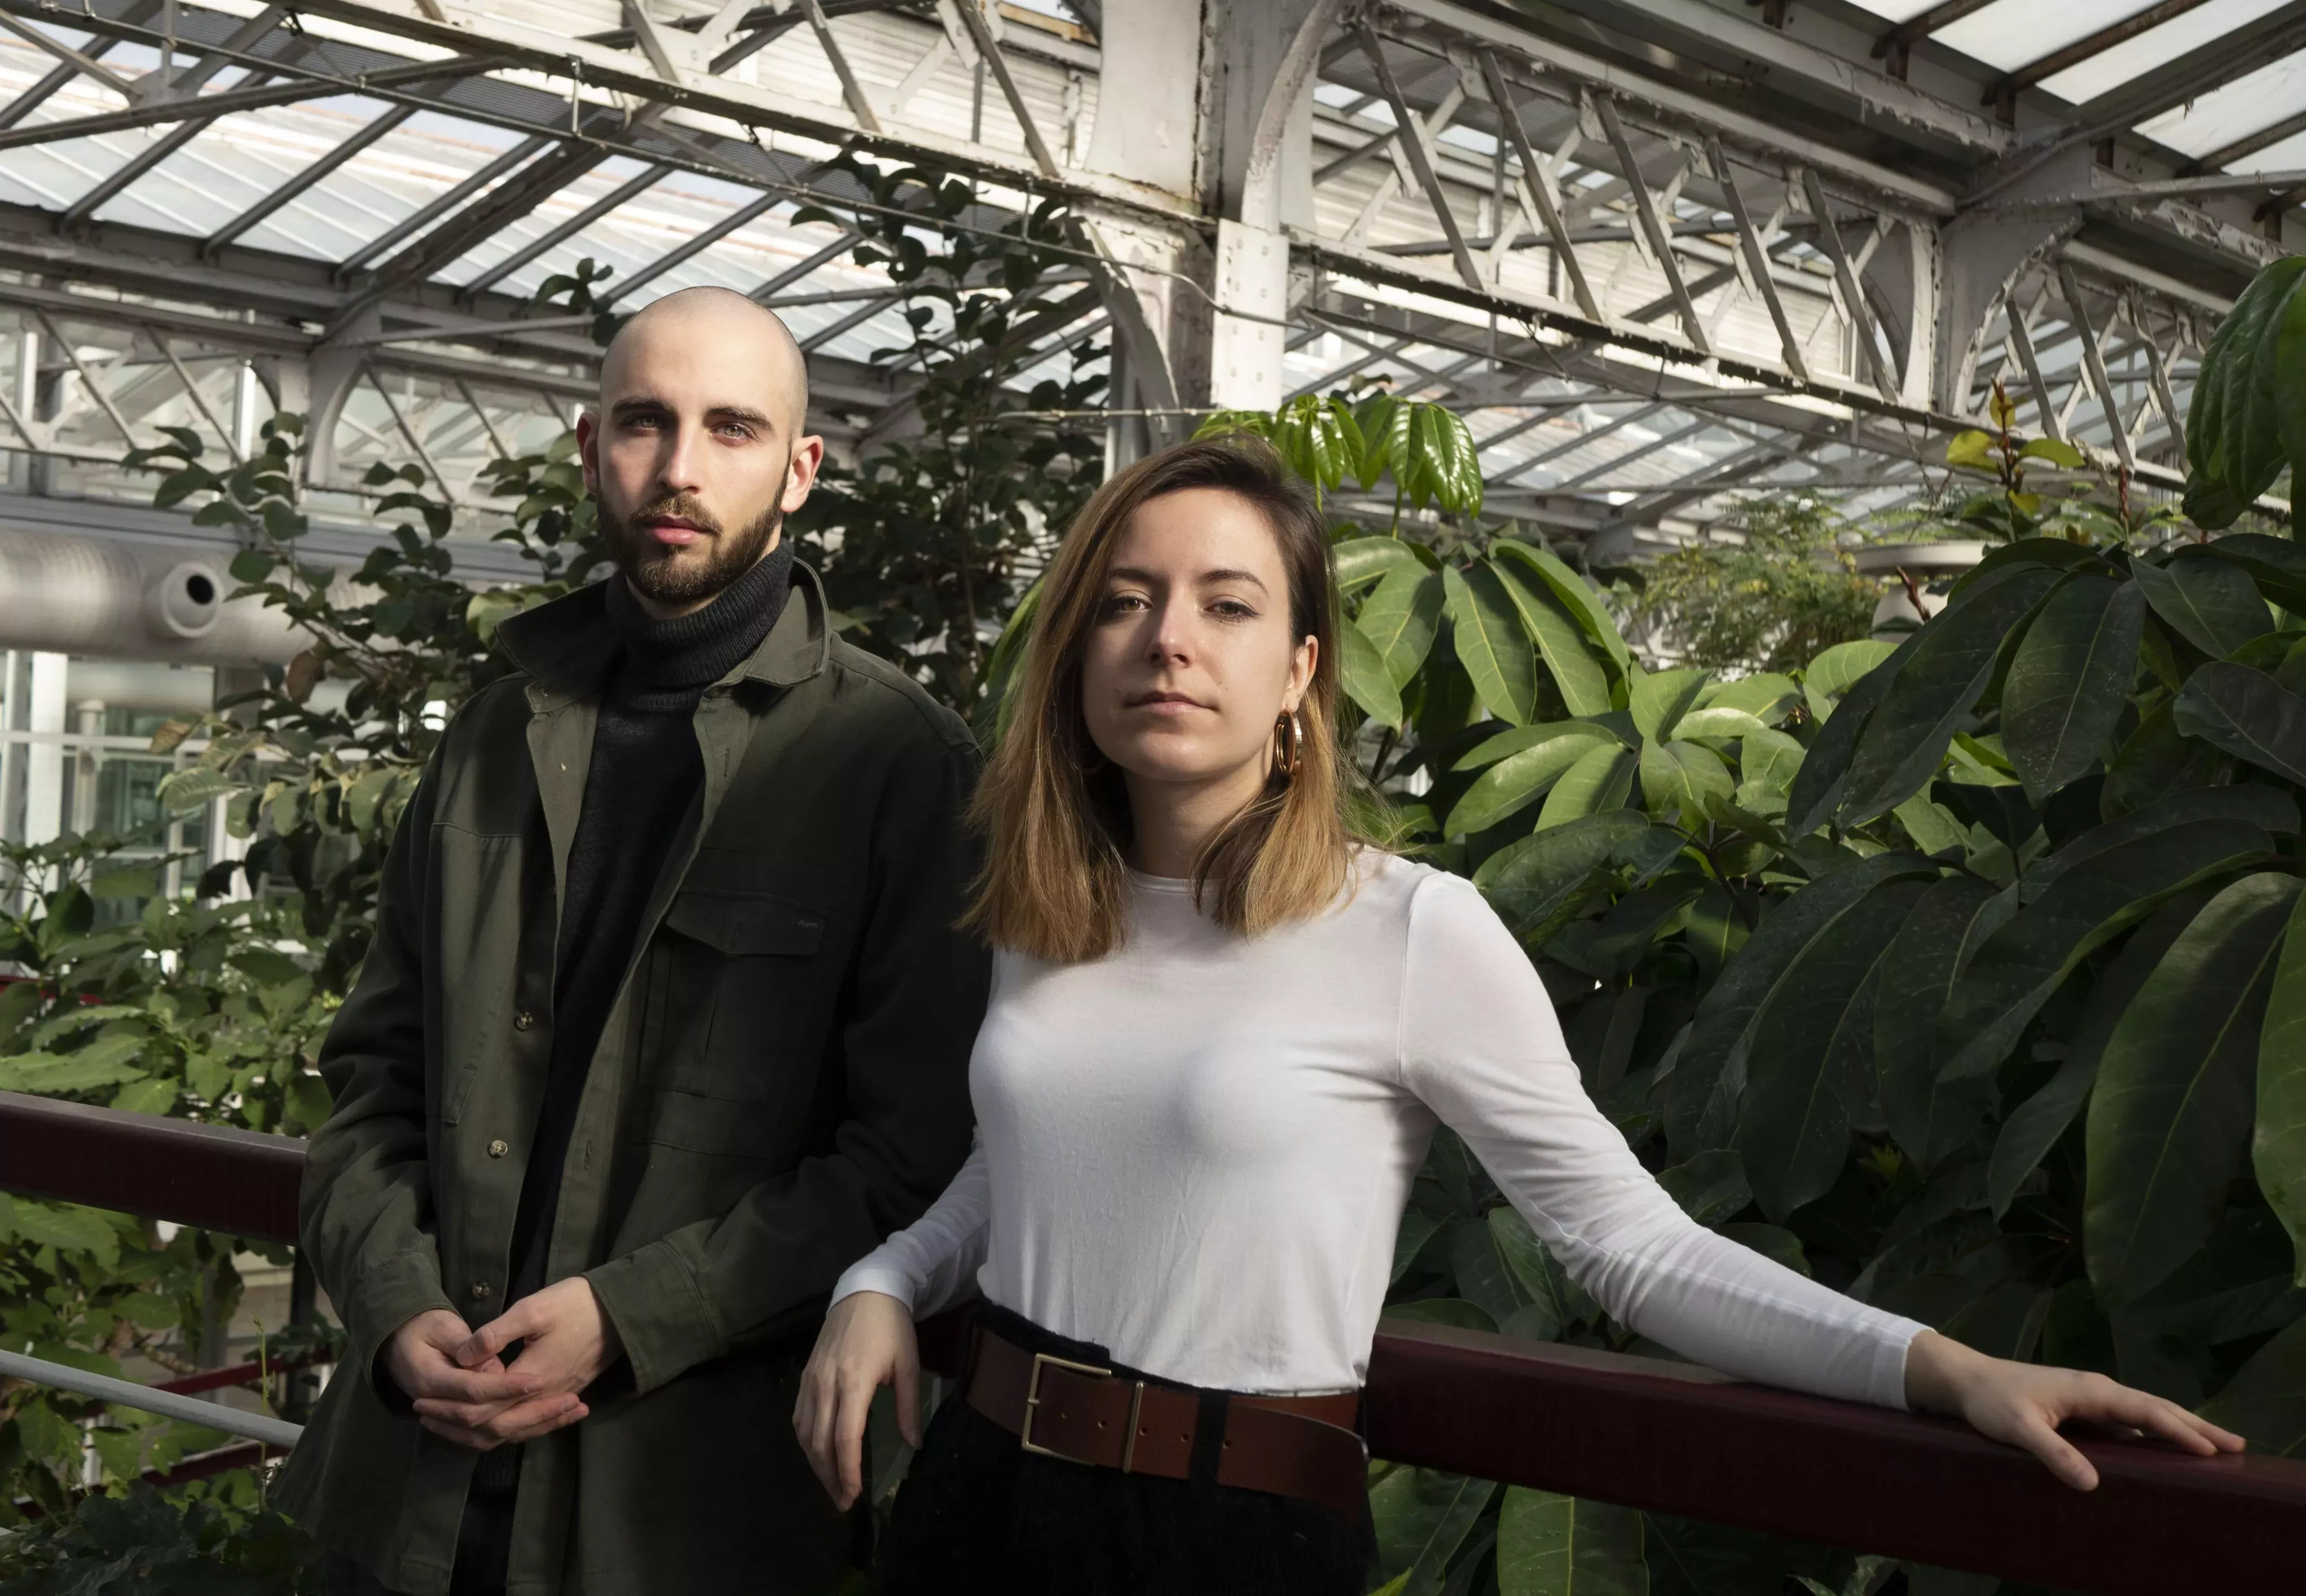 Man and woman standing in front of a glasshouse filled with greenery